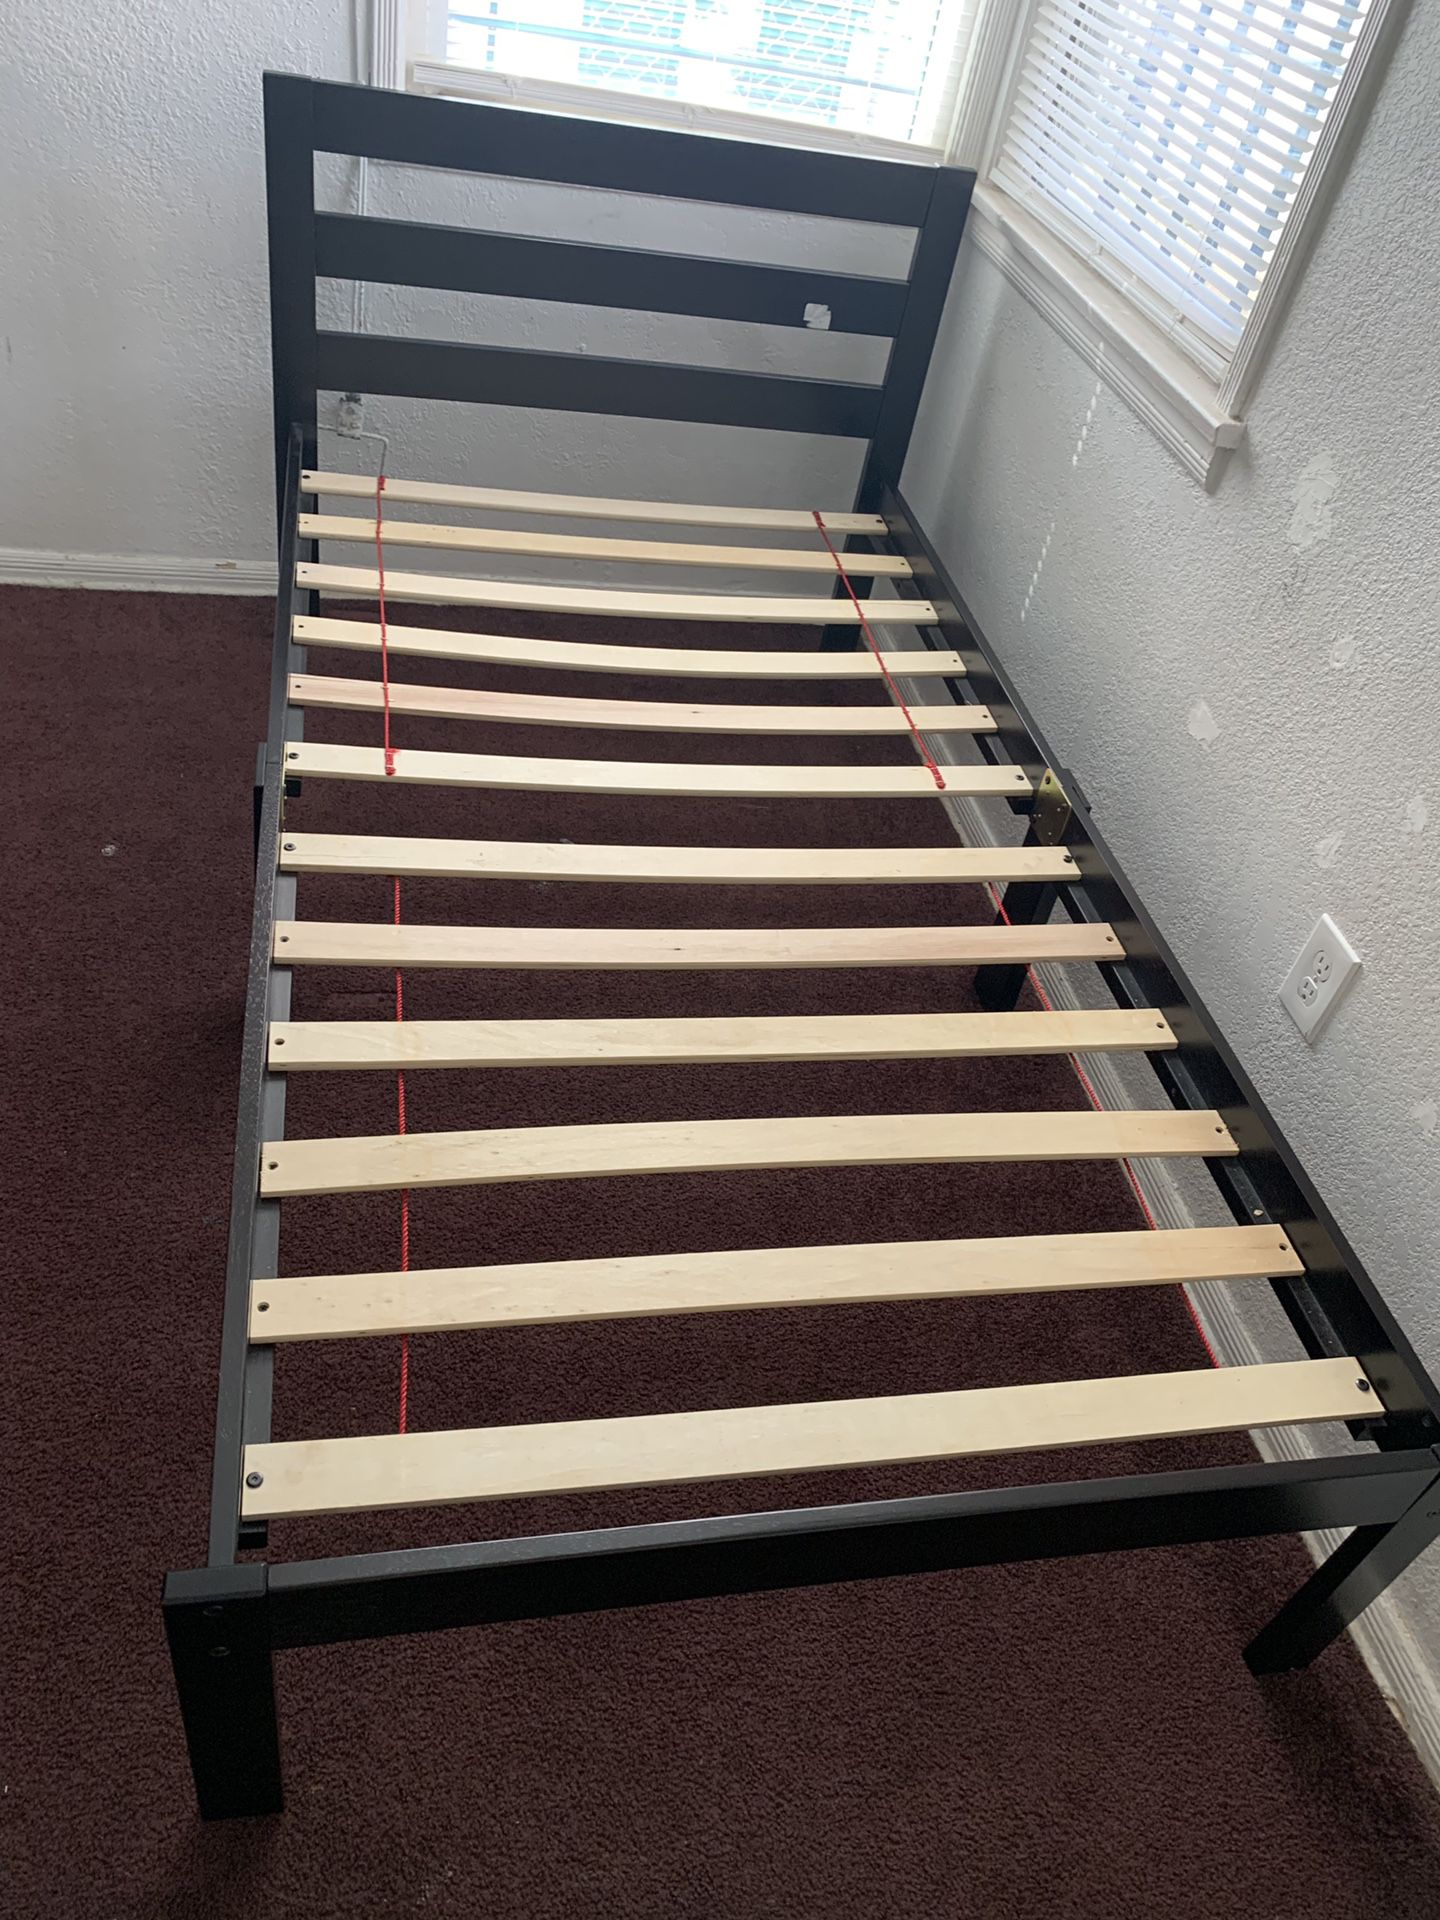 Full Bed Frame Wood Dark Brown Only Used One Month Like New $40